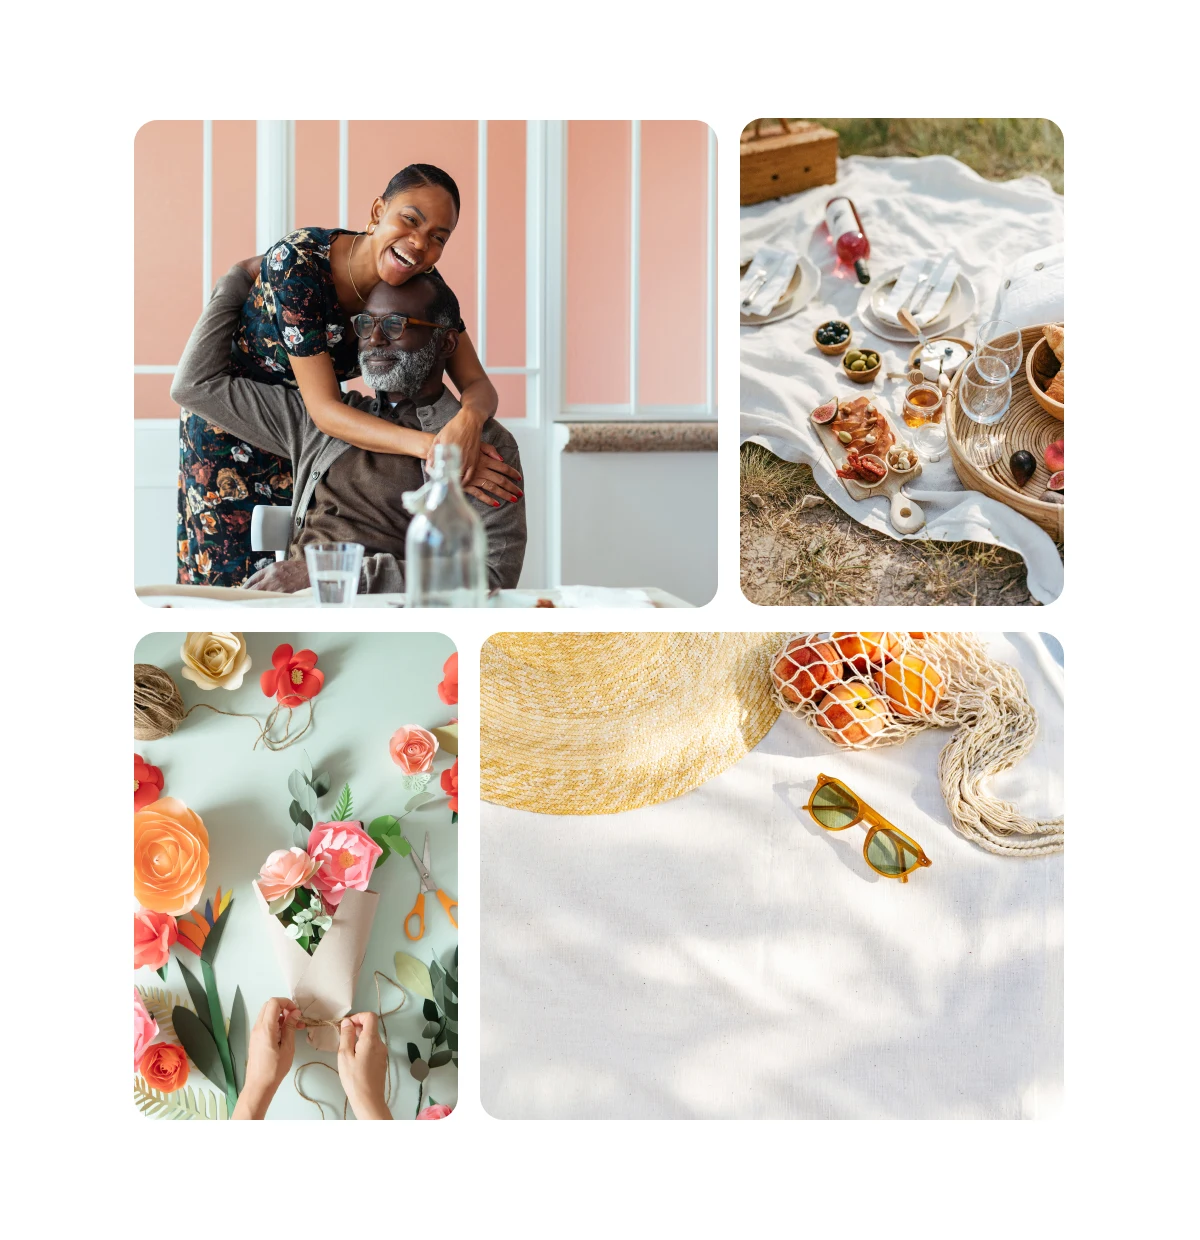  Pin grid featuring granddaughter embracing her grandfather, picnic setup, bouquet of paper flowers, blanket with sunglasses, hat, and oranges.